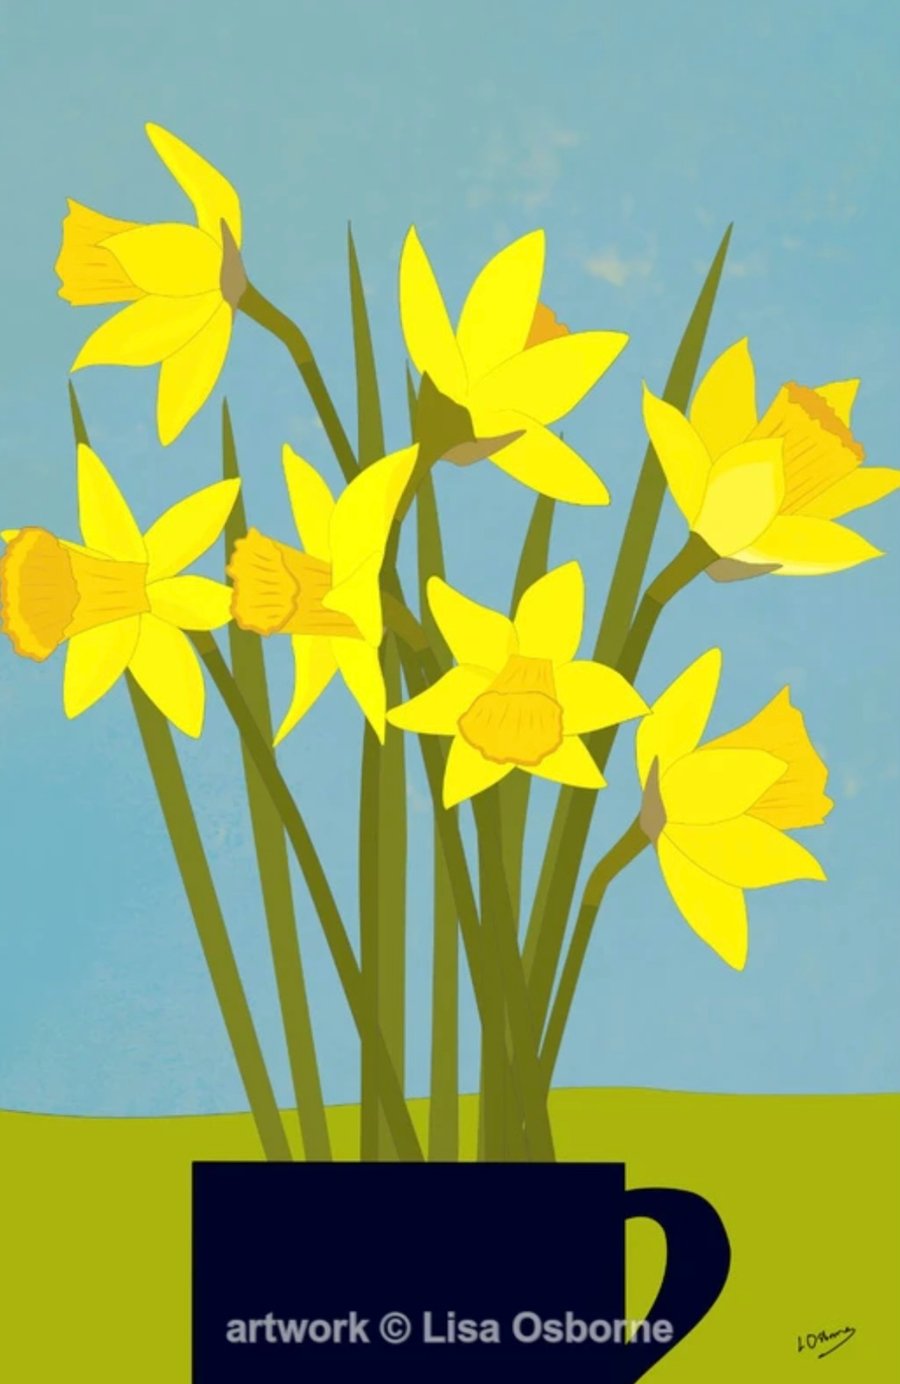 Daffodils - signed print from digital illustrations